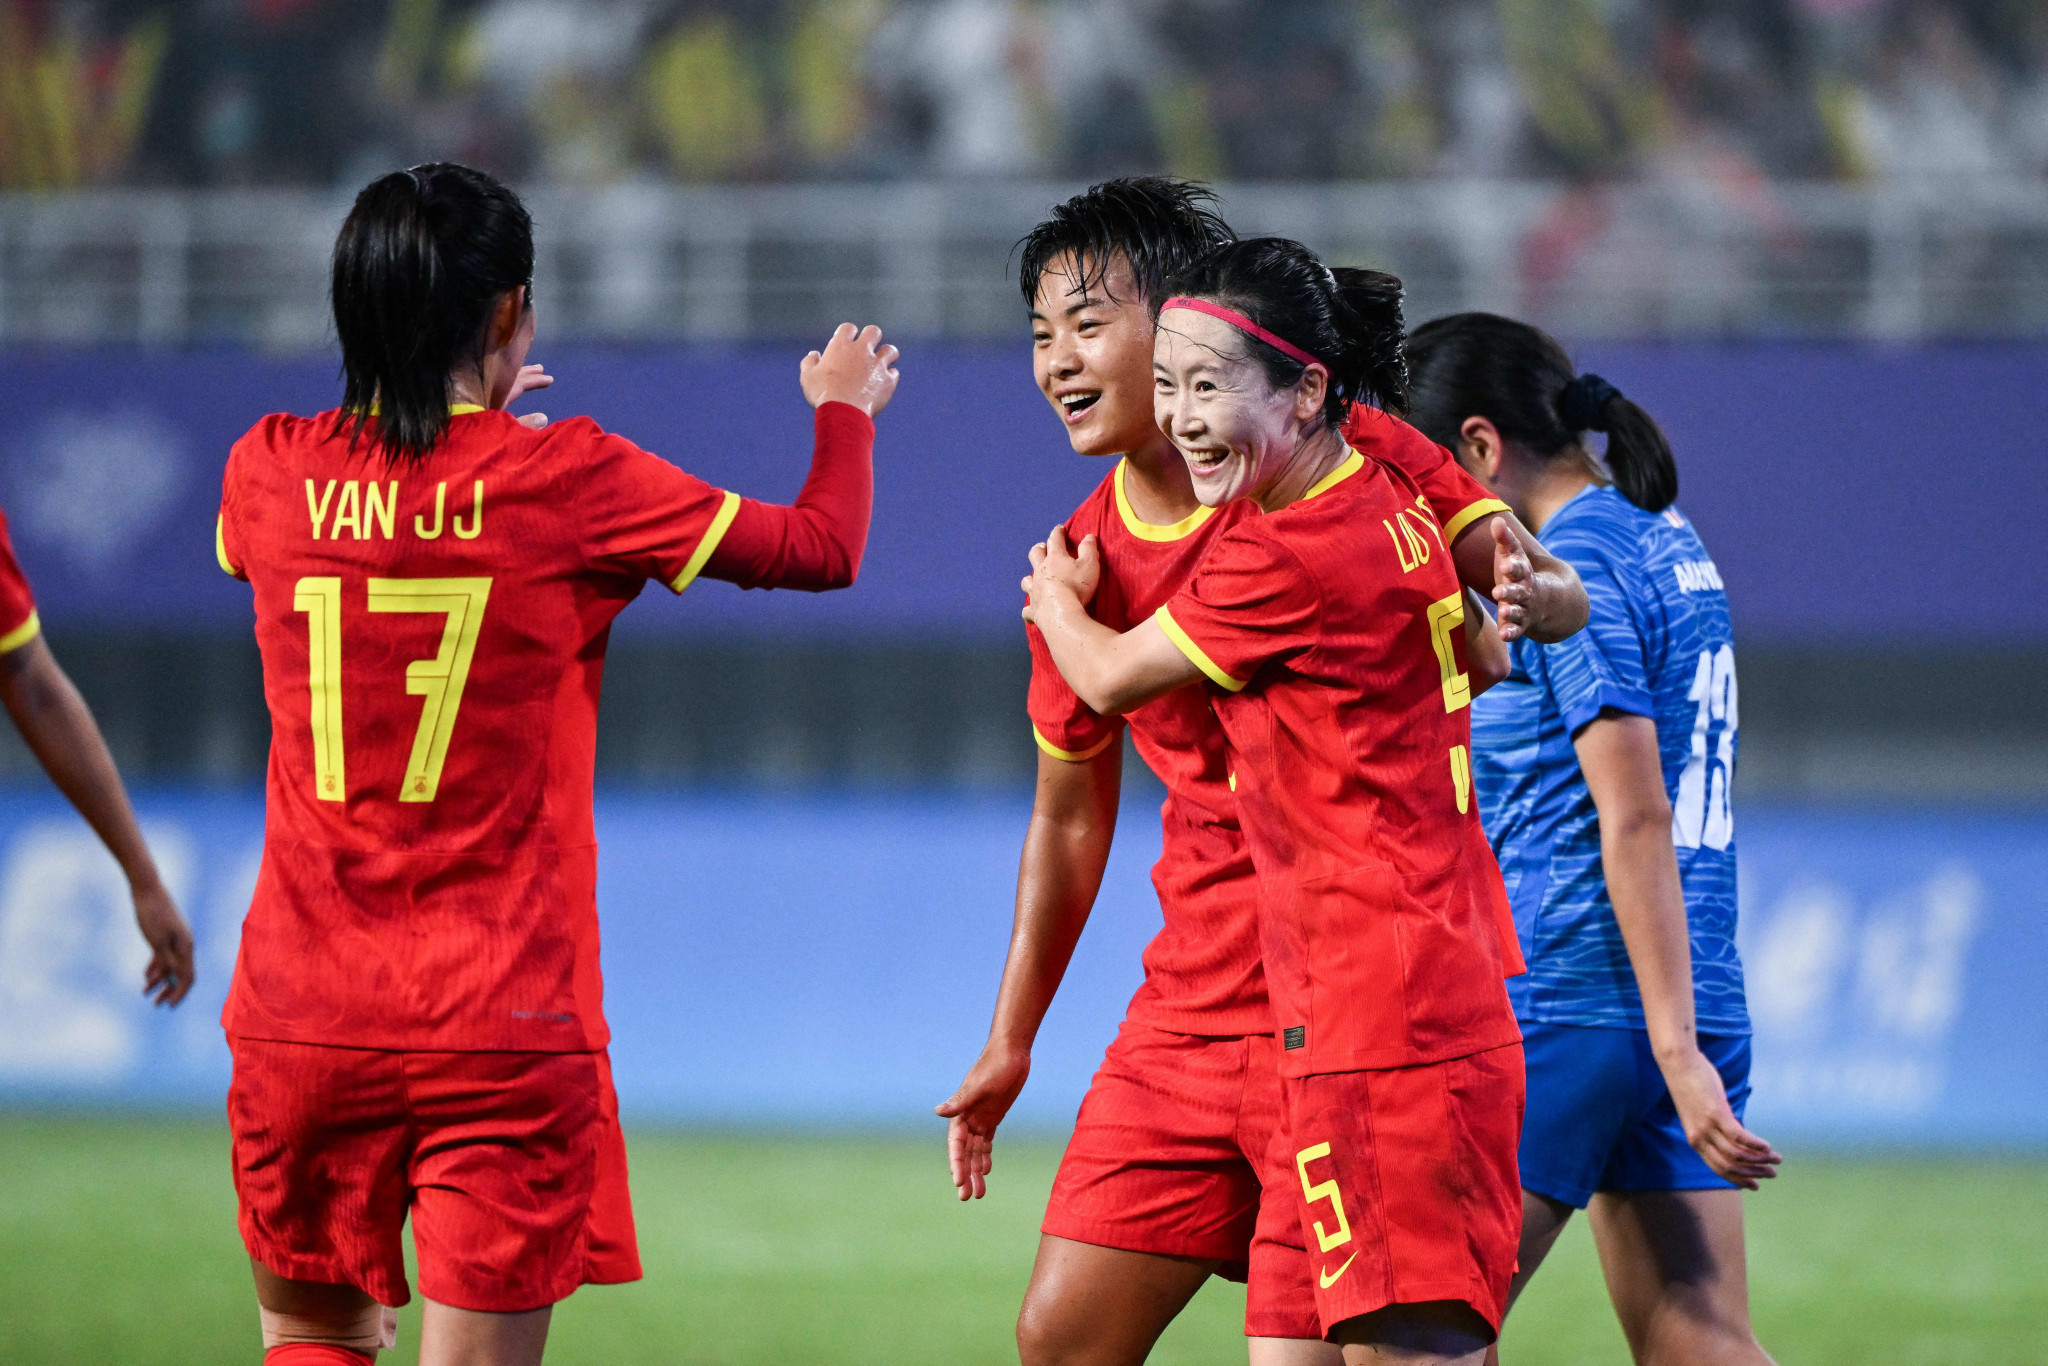 China inflicted a brutal loss on Mongolia in the women's football tournament ©Getty Images